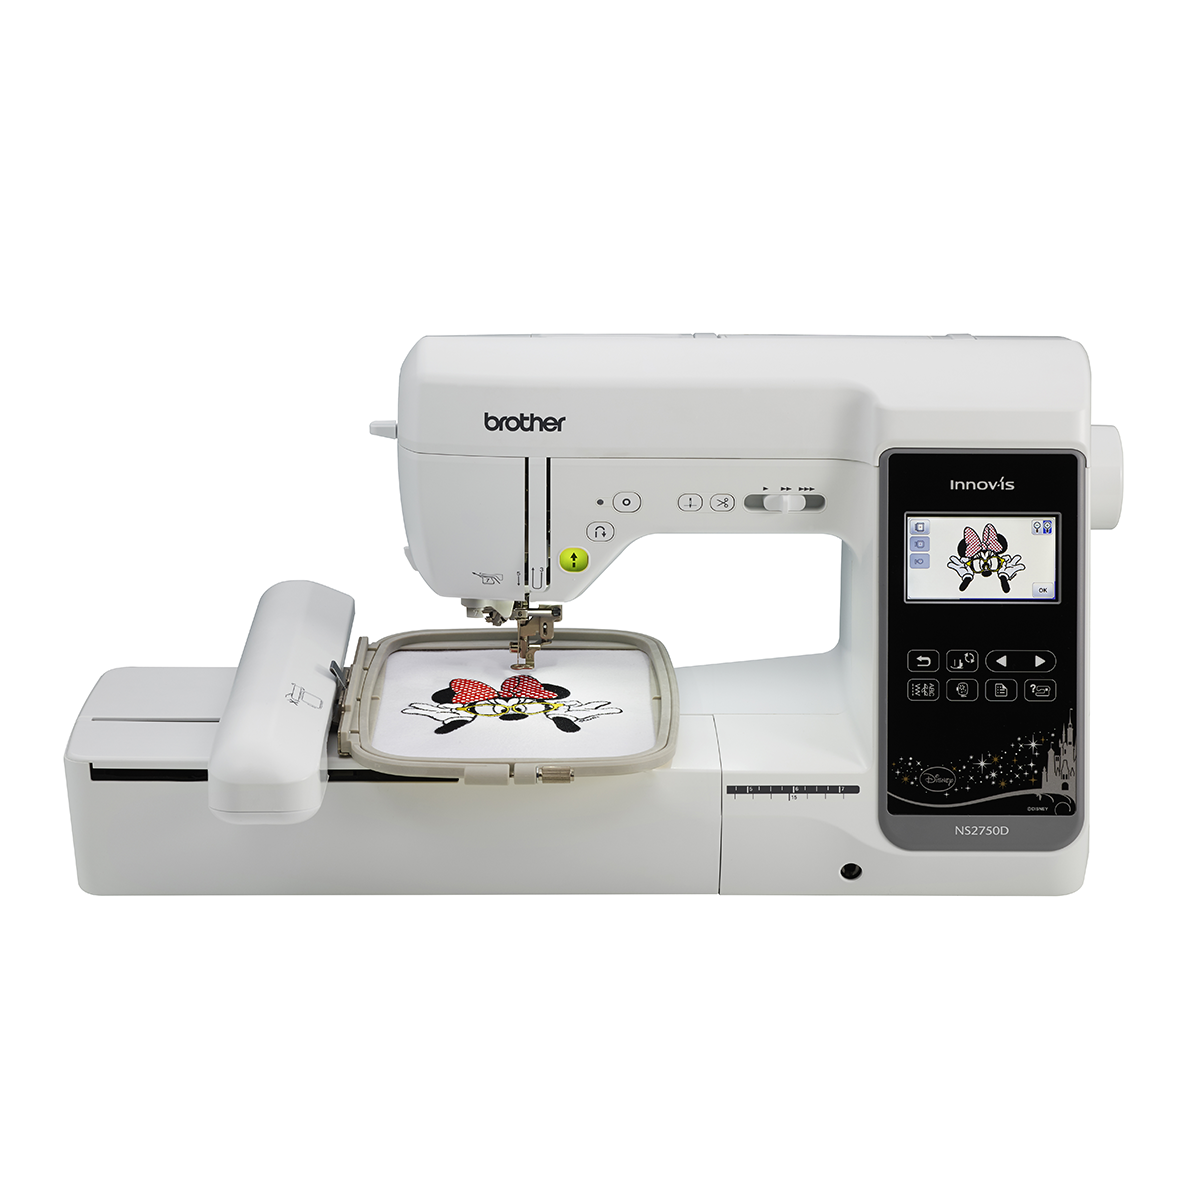 Brother Innovis NS2750D combination sewing and embroidery machine